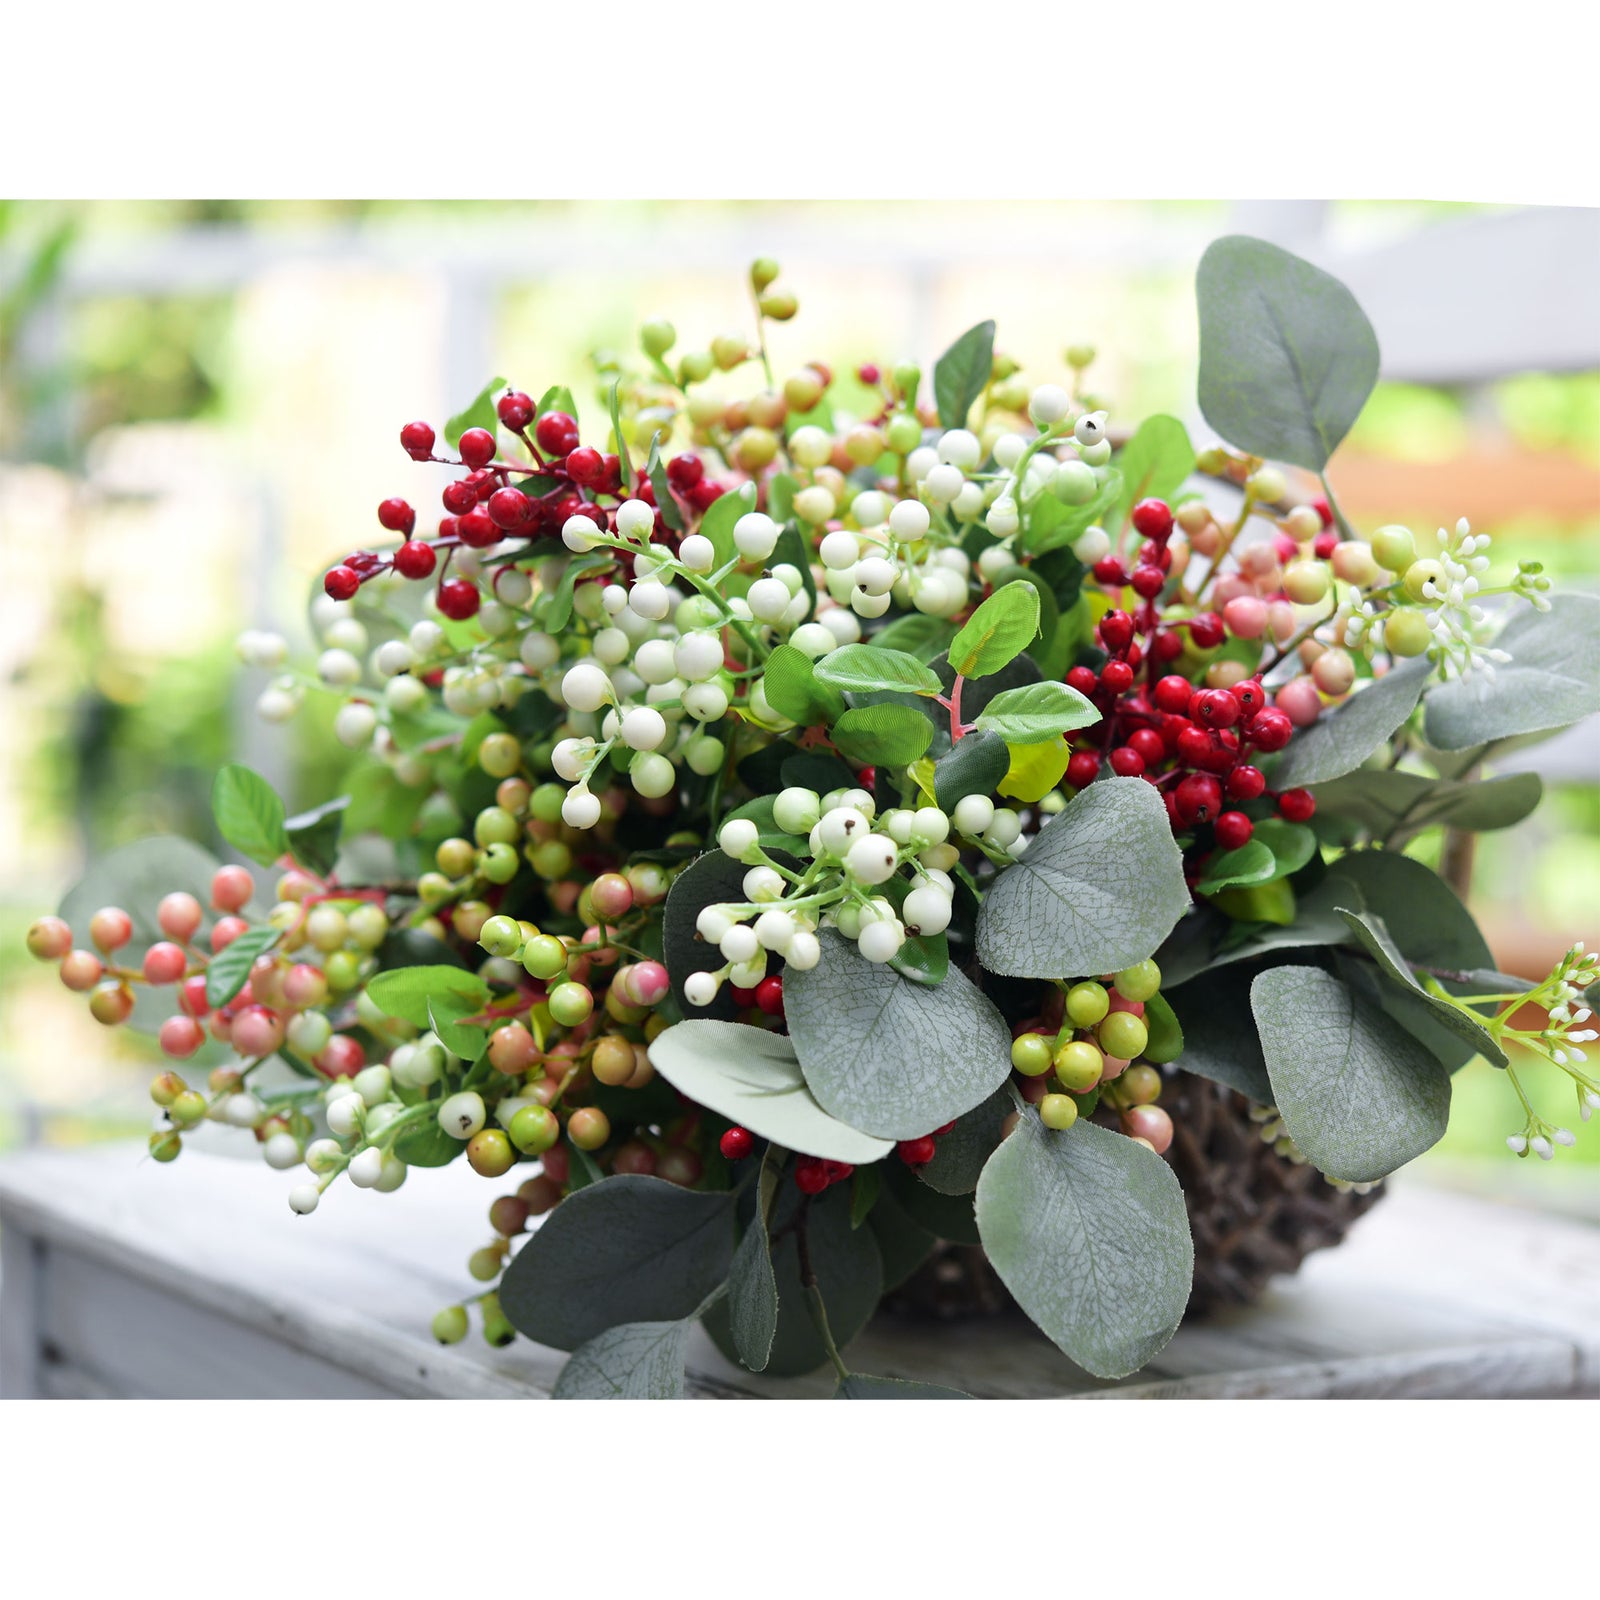 Festive Joyful Artificial Holly Red Berry Stems for the Holidays